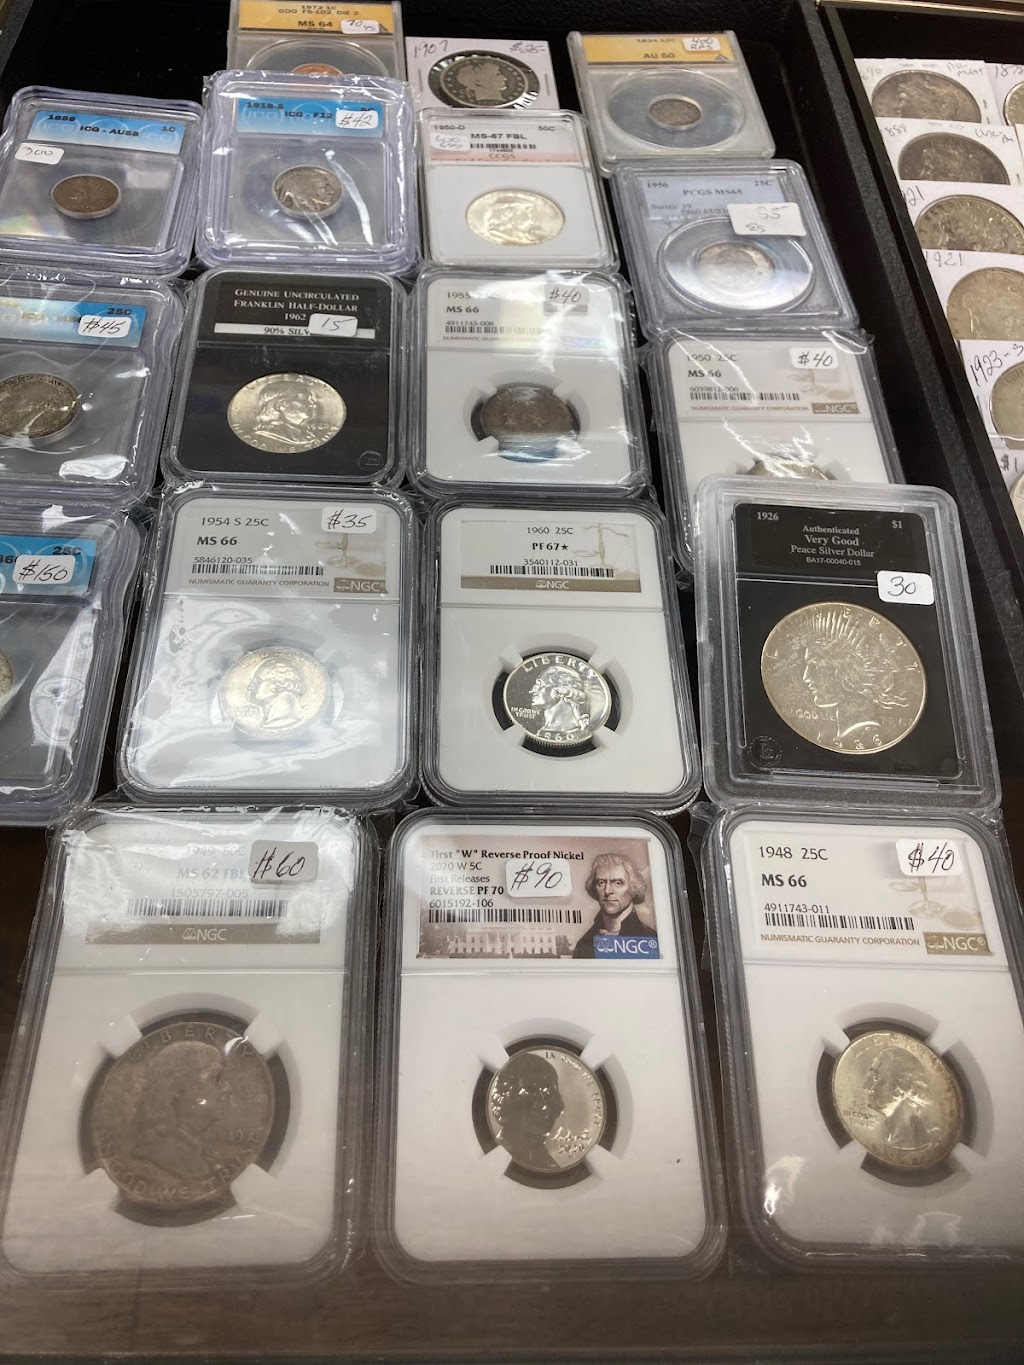 Legacy Coins & Curiosities | 1628 Dale Mabry Hwy, Lutz, FL 33548, USA | Phone: (813) 948-8777